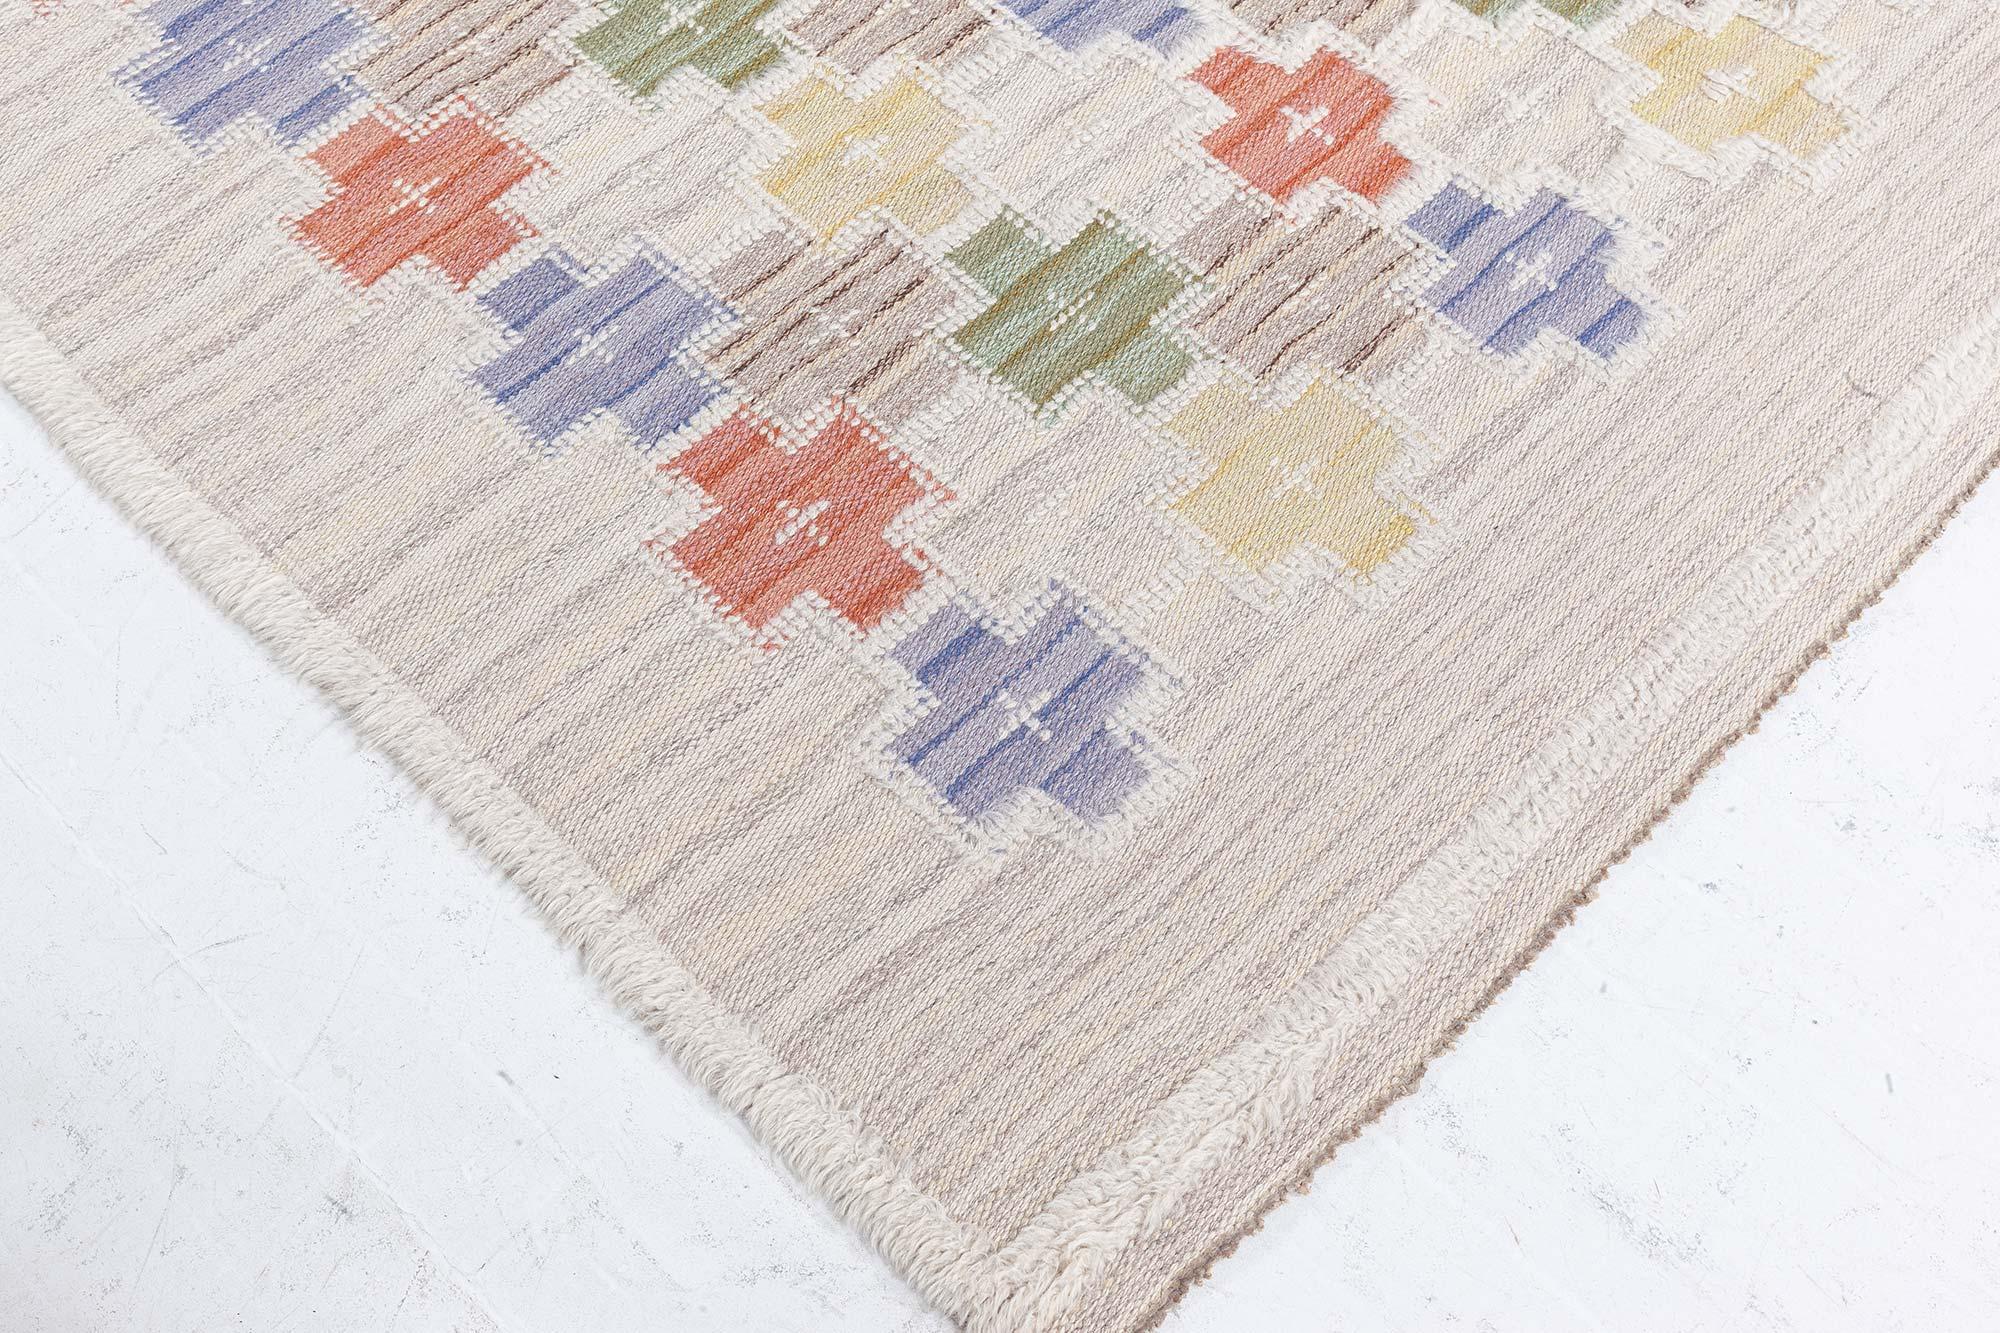 Vintage Swedish High and Low Rug by Sodra Kalmar Lans Hemslojd In Good Condition For Sale In New York, NY